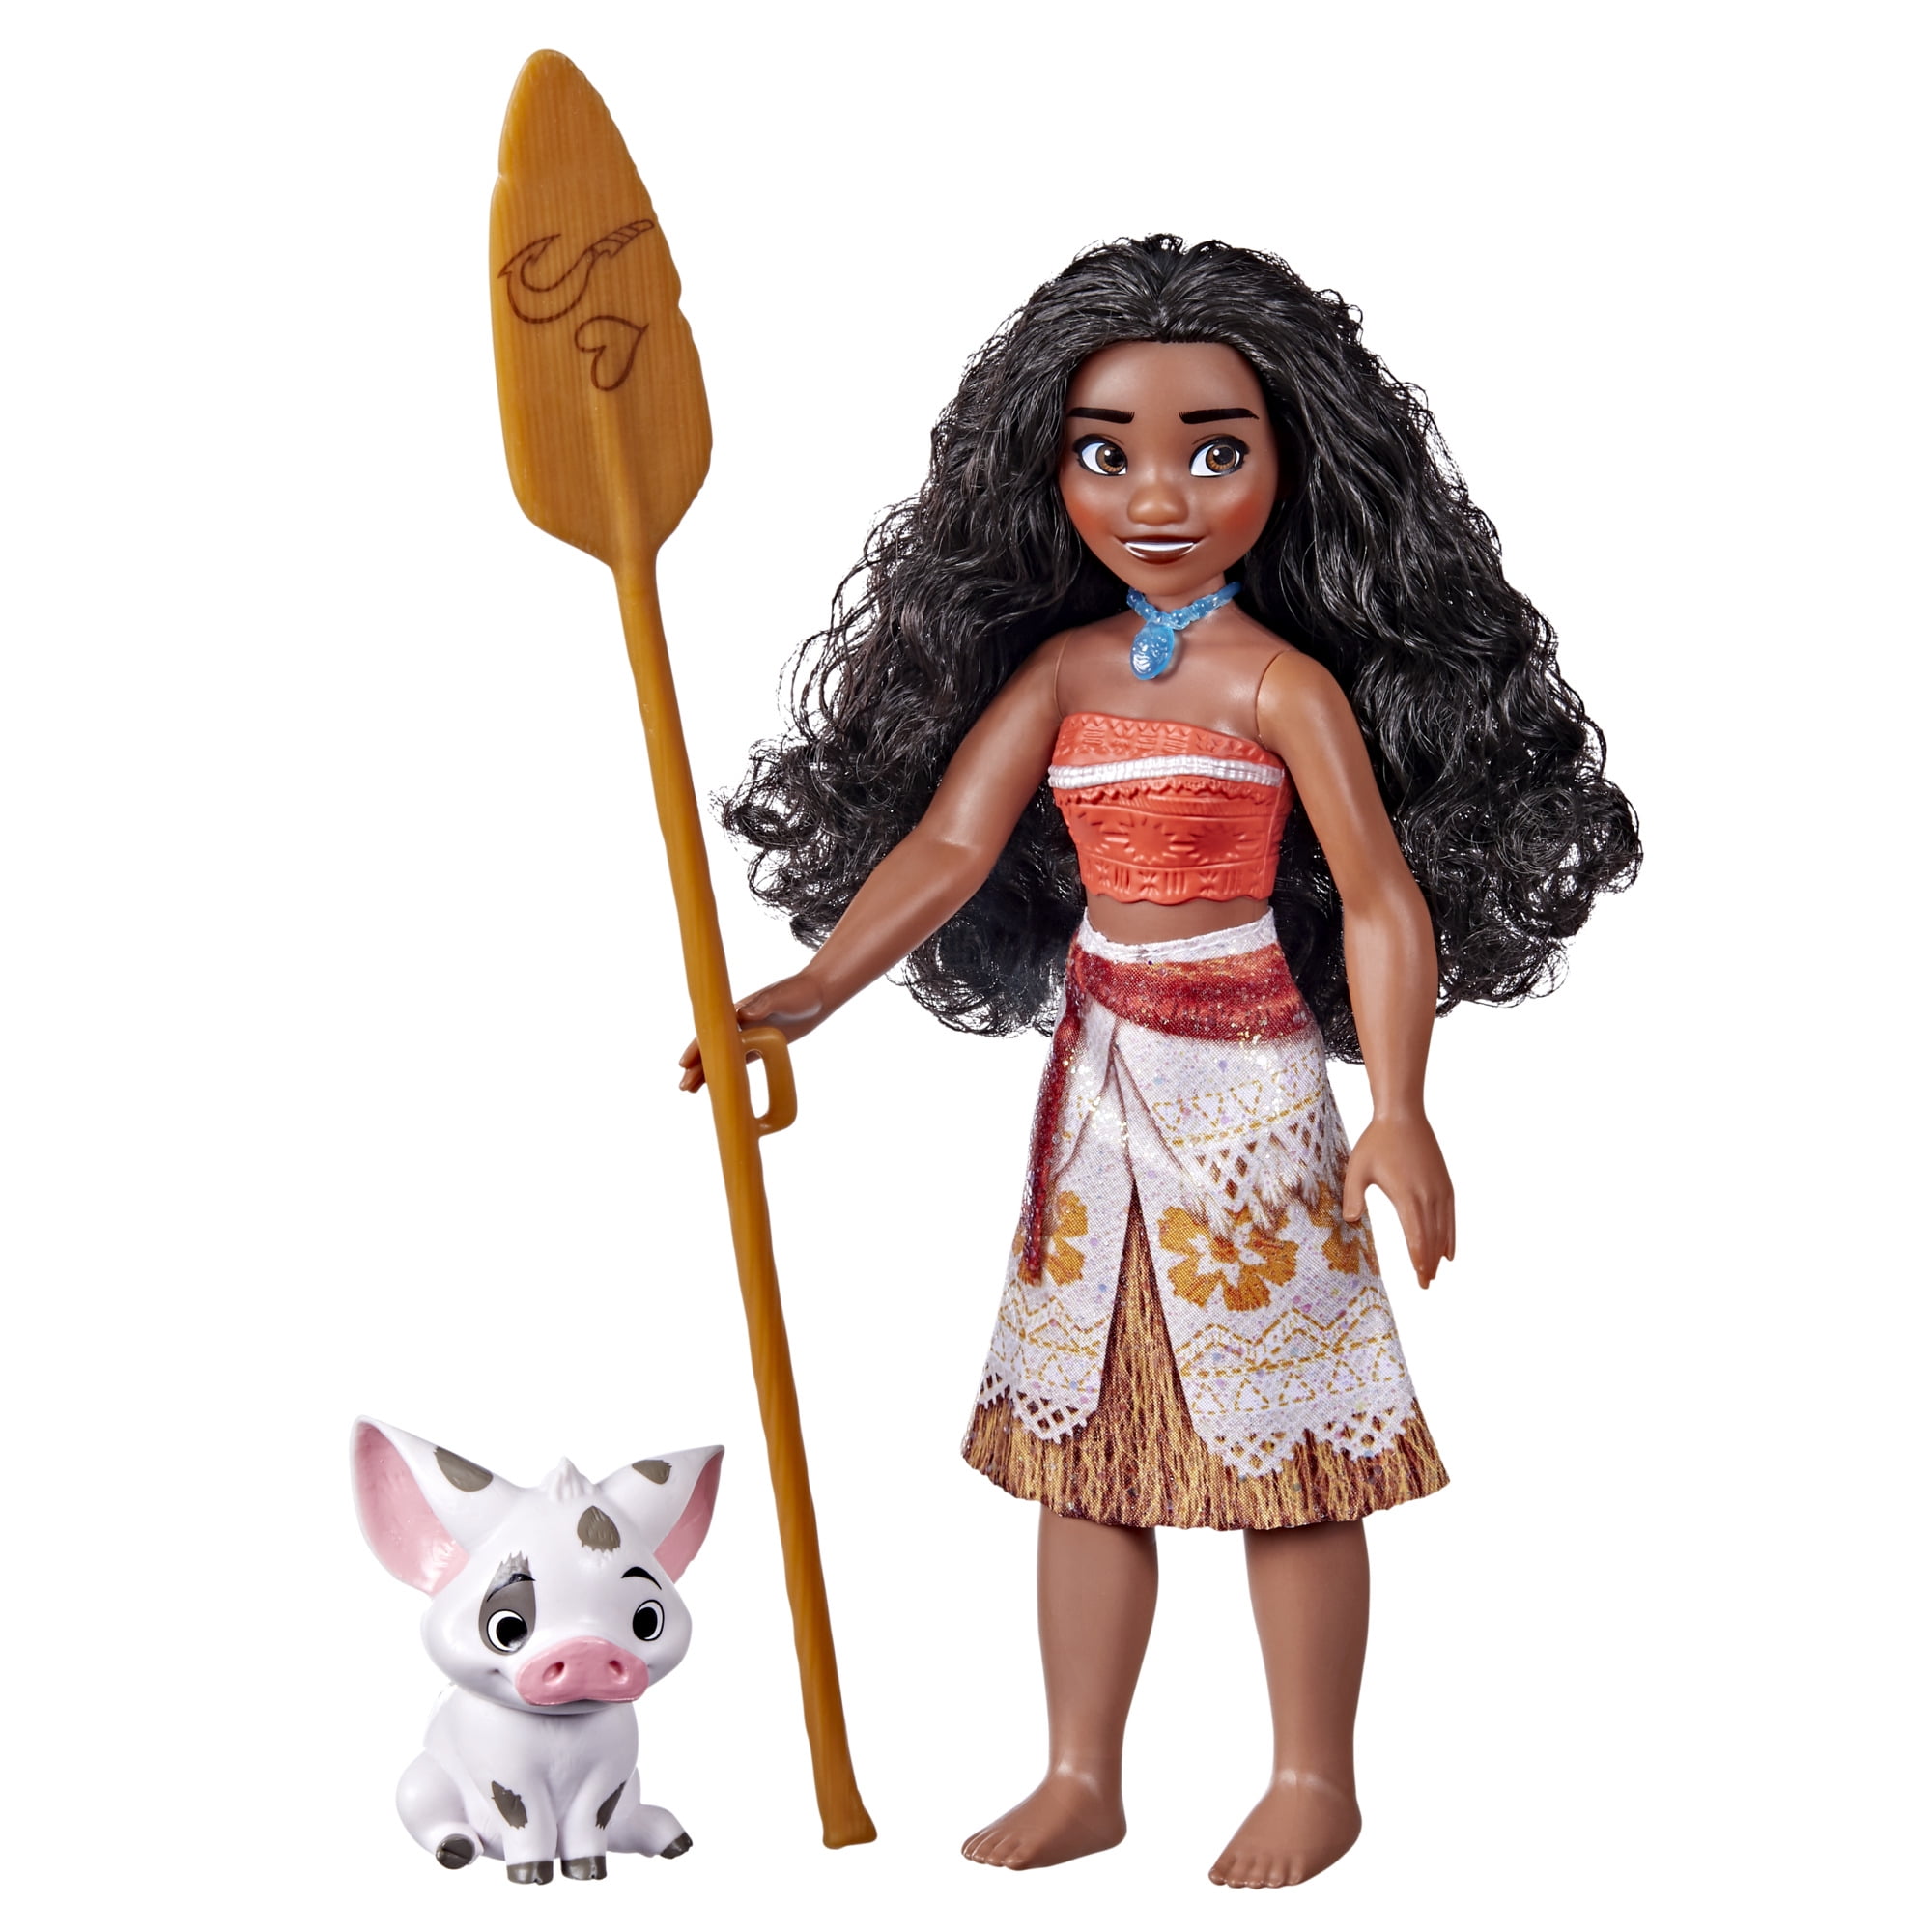 Kids Birthday Gifts Moana Princess Adventure Characters Action Figure Doll Toys